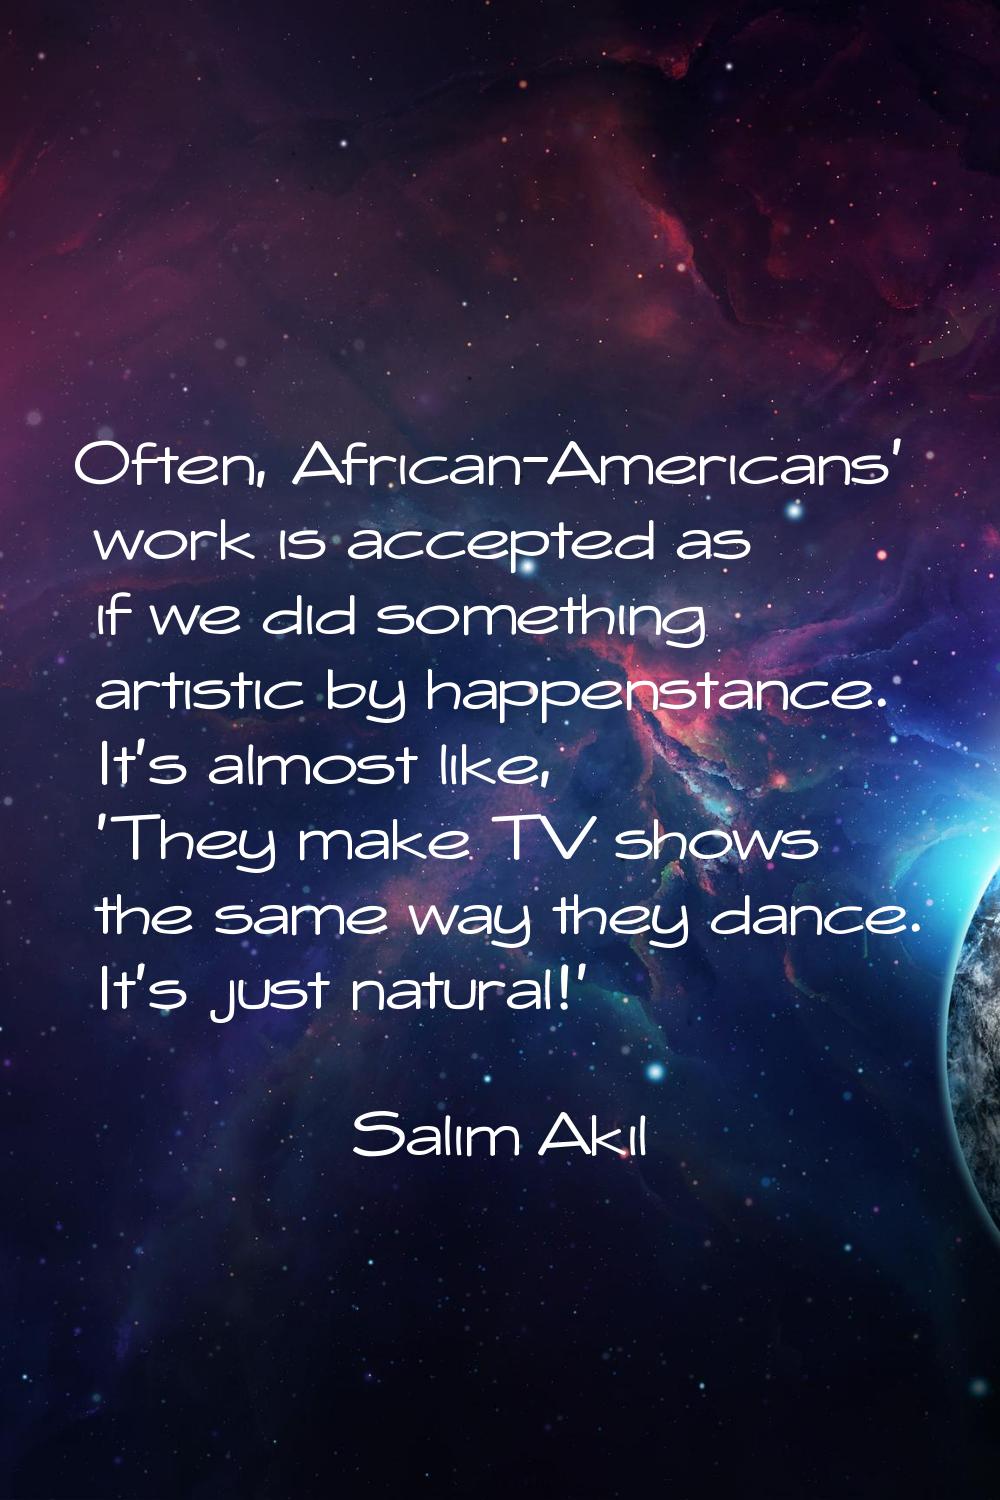 Often, African-Americans' work is accepted as if we did something artistic by happenstance. It's al